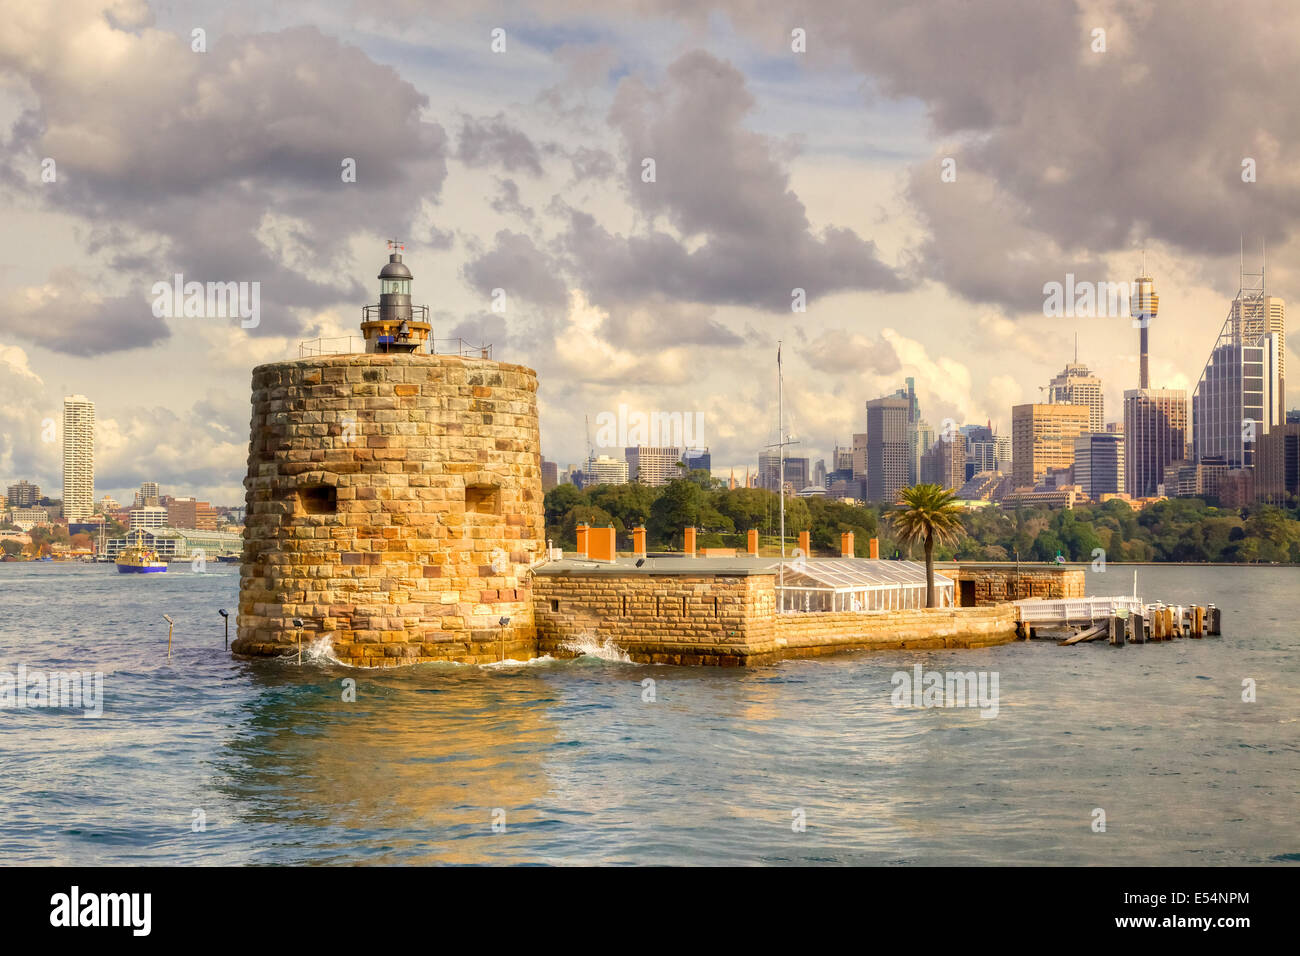 Fort Denison is a former penal site and defensive facility occupying a small island in Sydney Harbour. Stock Photo